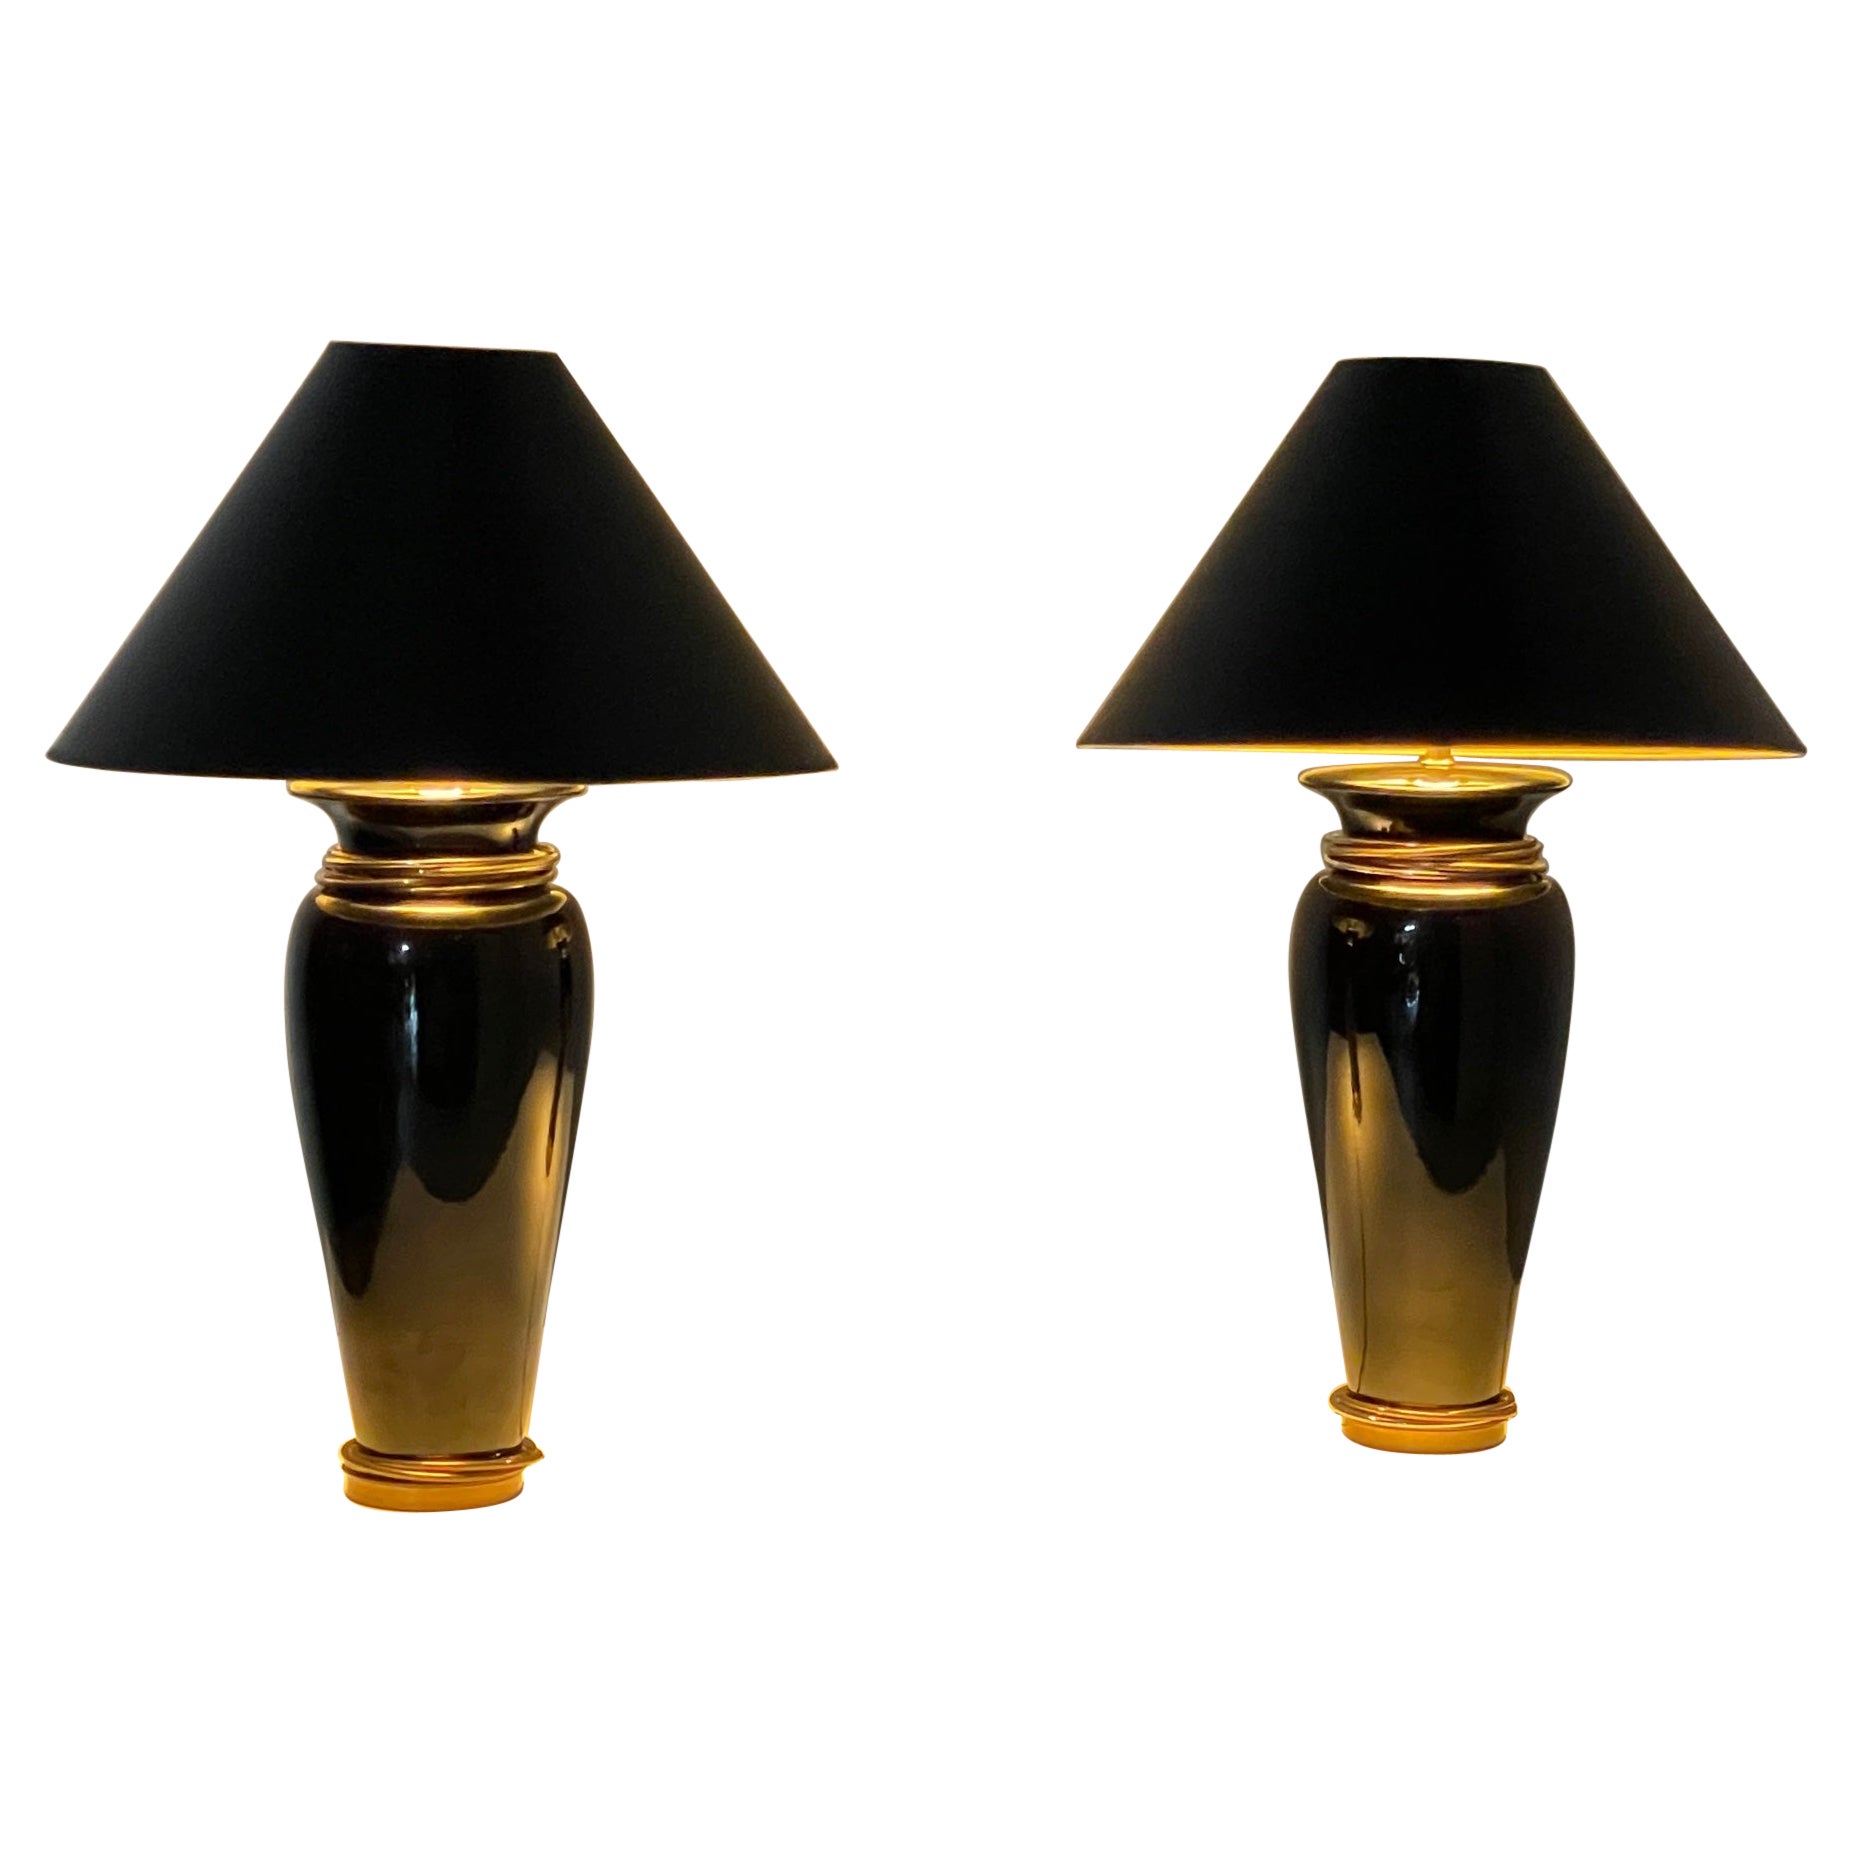 Glamorous Pair of Chapman Black Ceramic Table Lamps with Brass & Steel Rings For Sale